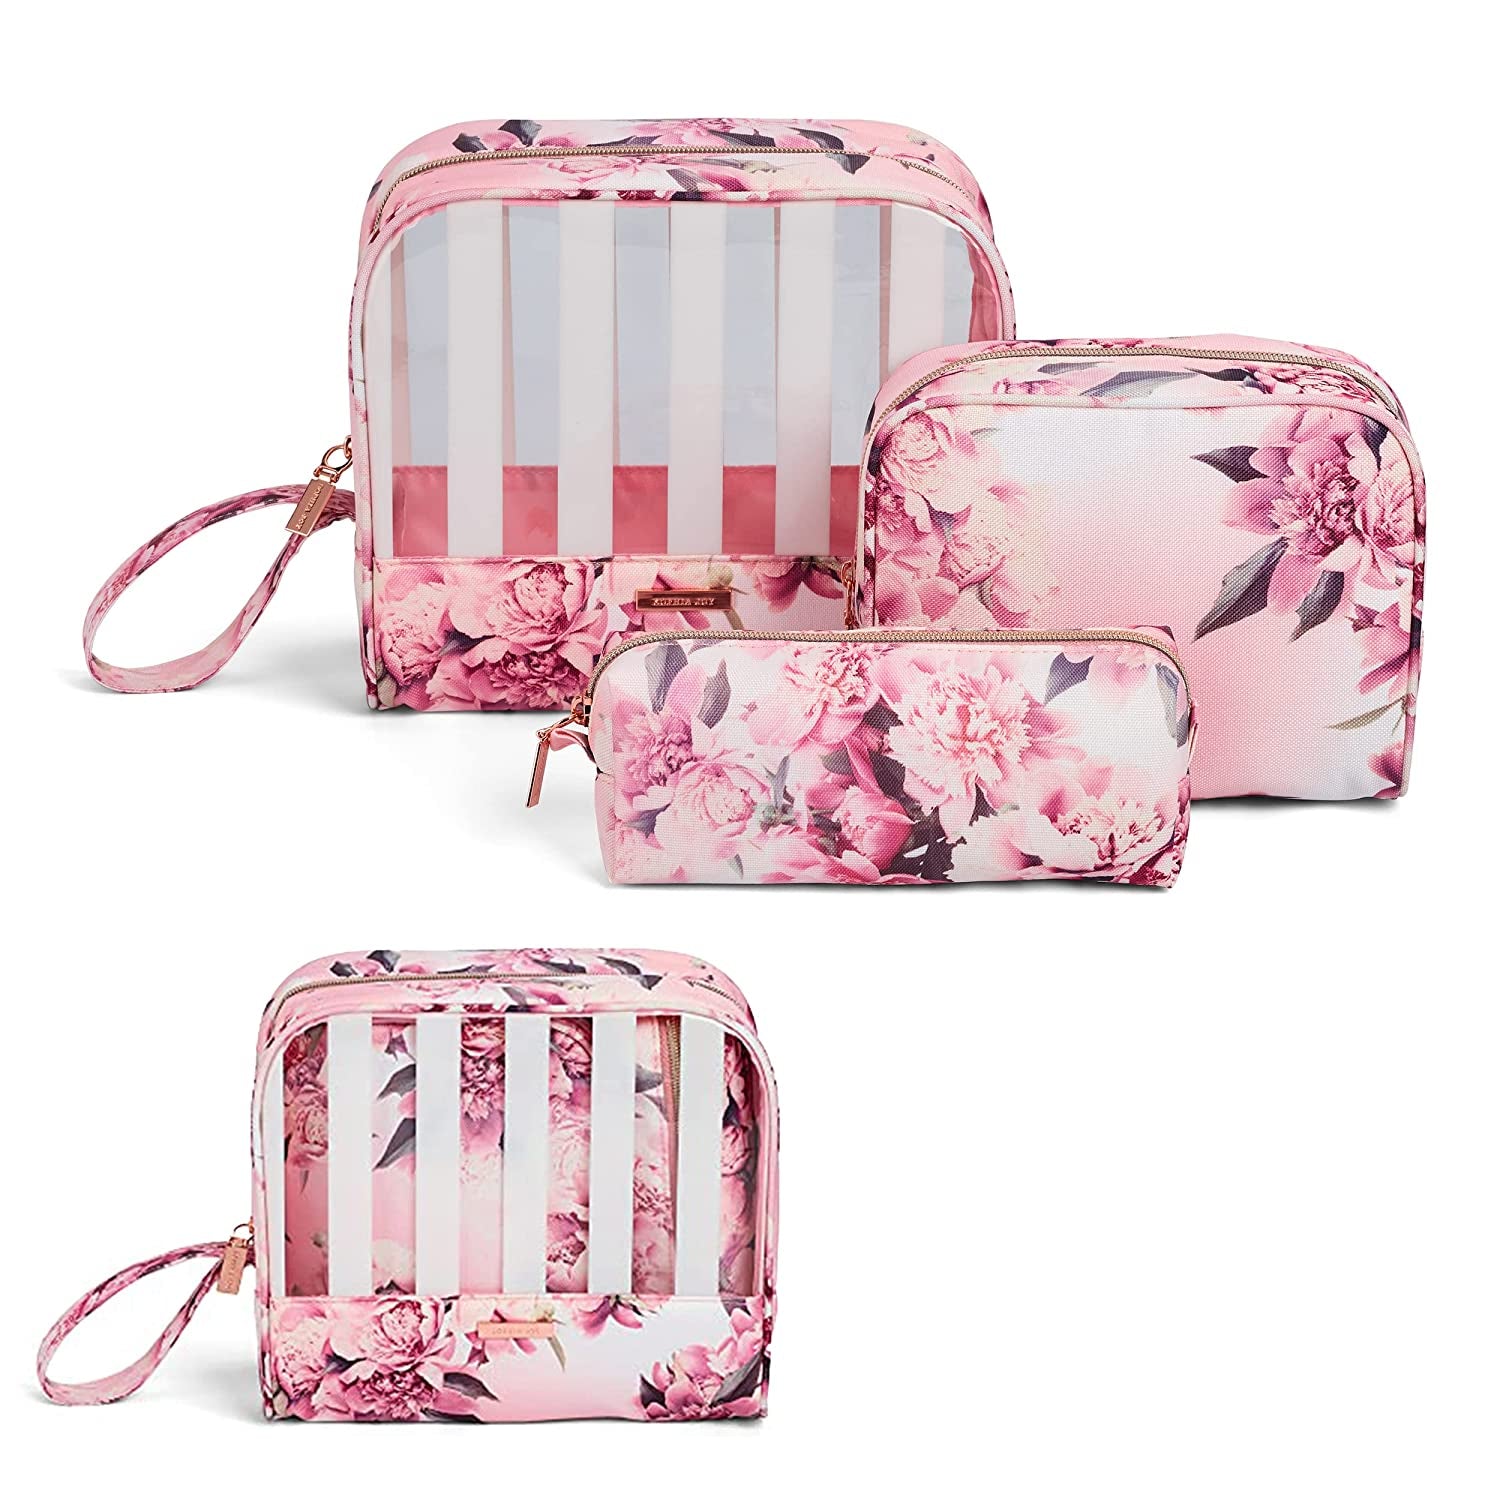 Conair Travel Makeup Bag, Large Toiletry and Cosmetic Bag, Perfect Size for Use at Home or Travel, Train Case Shape in Pink Floral Print